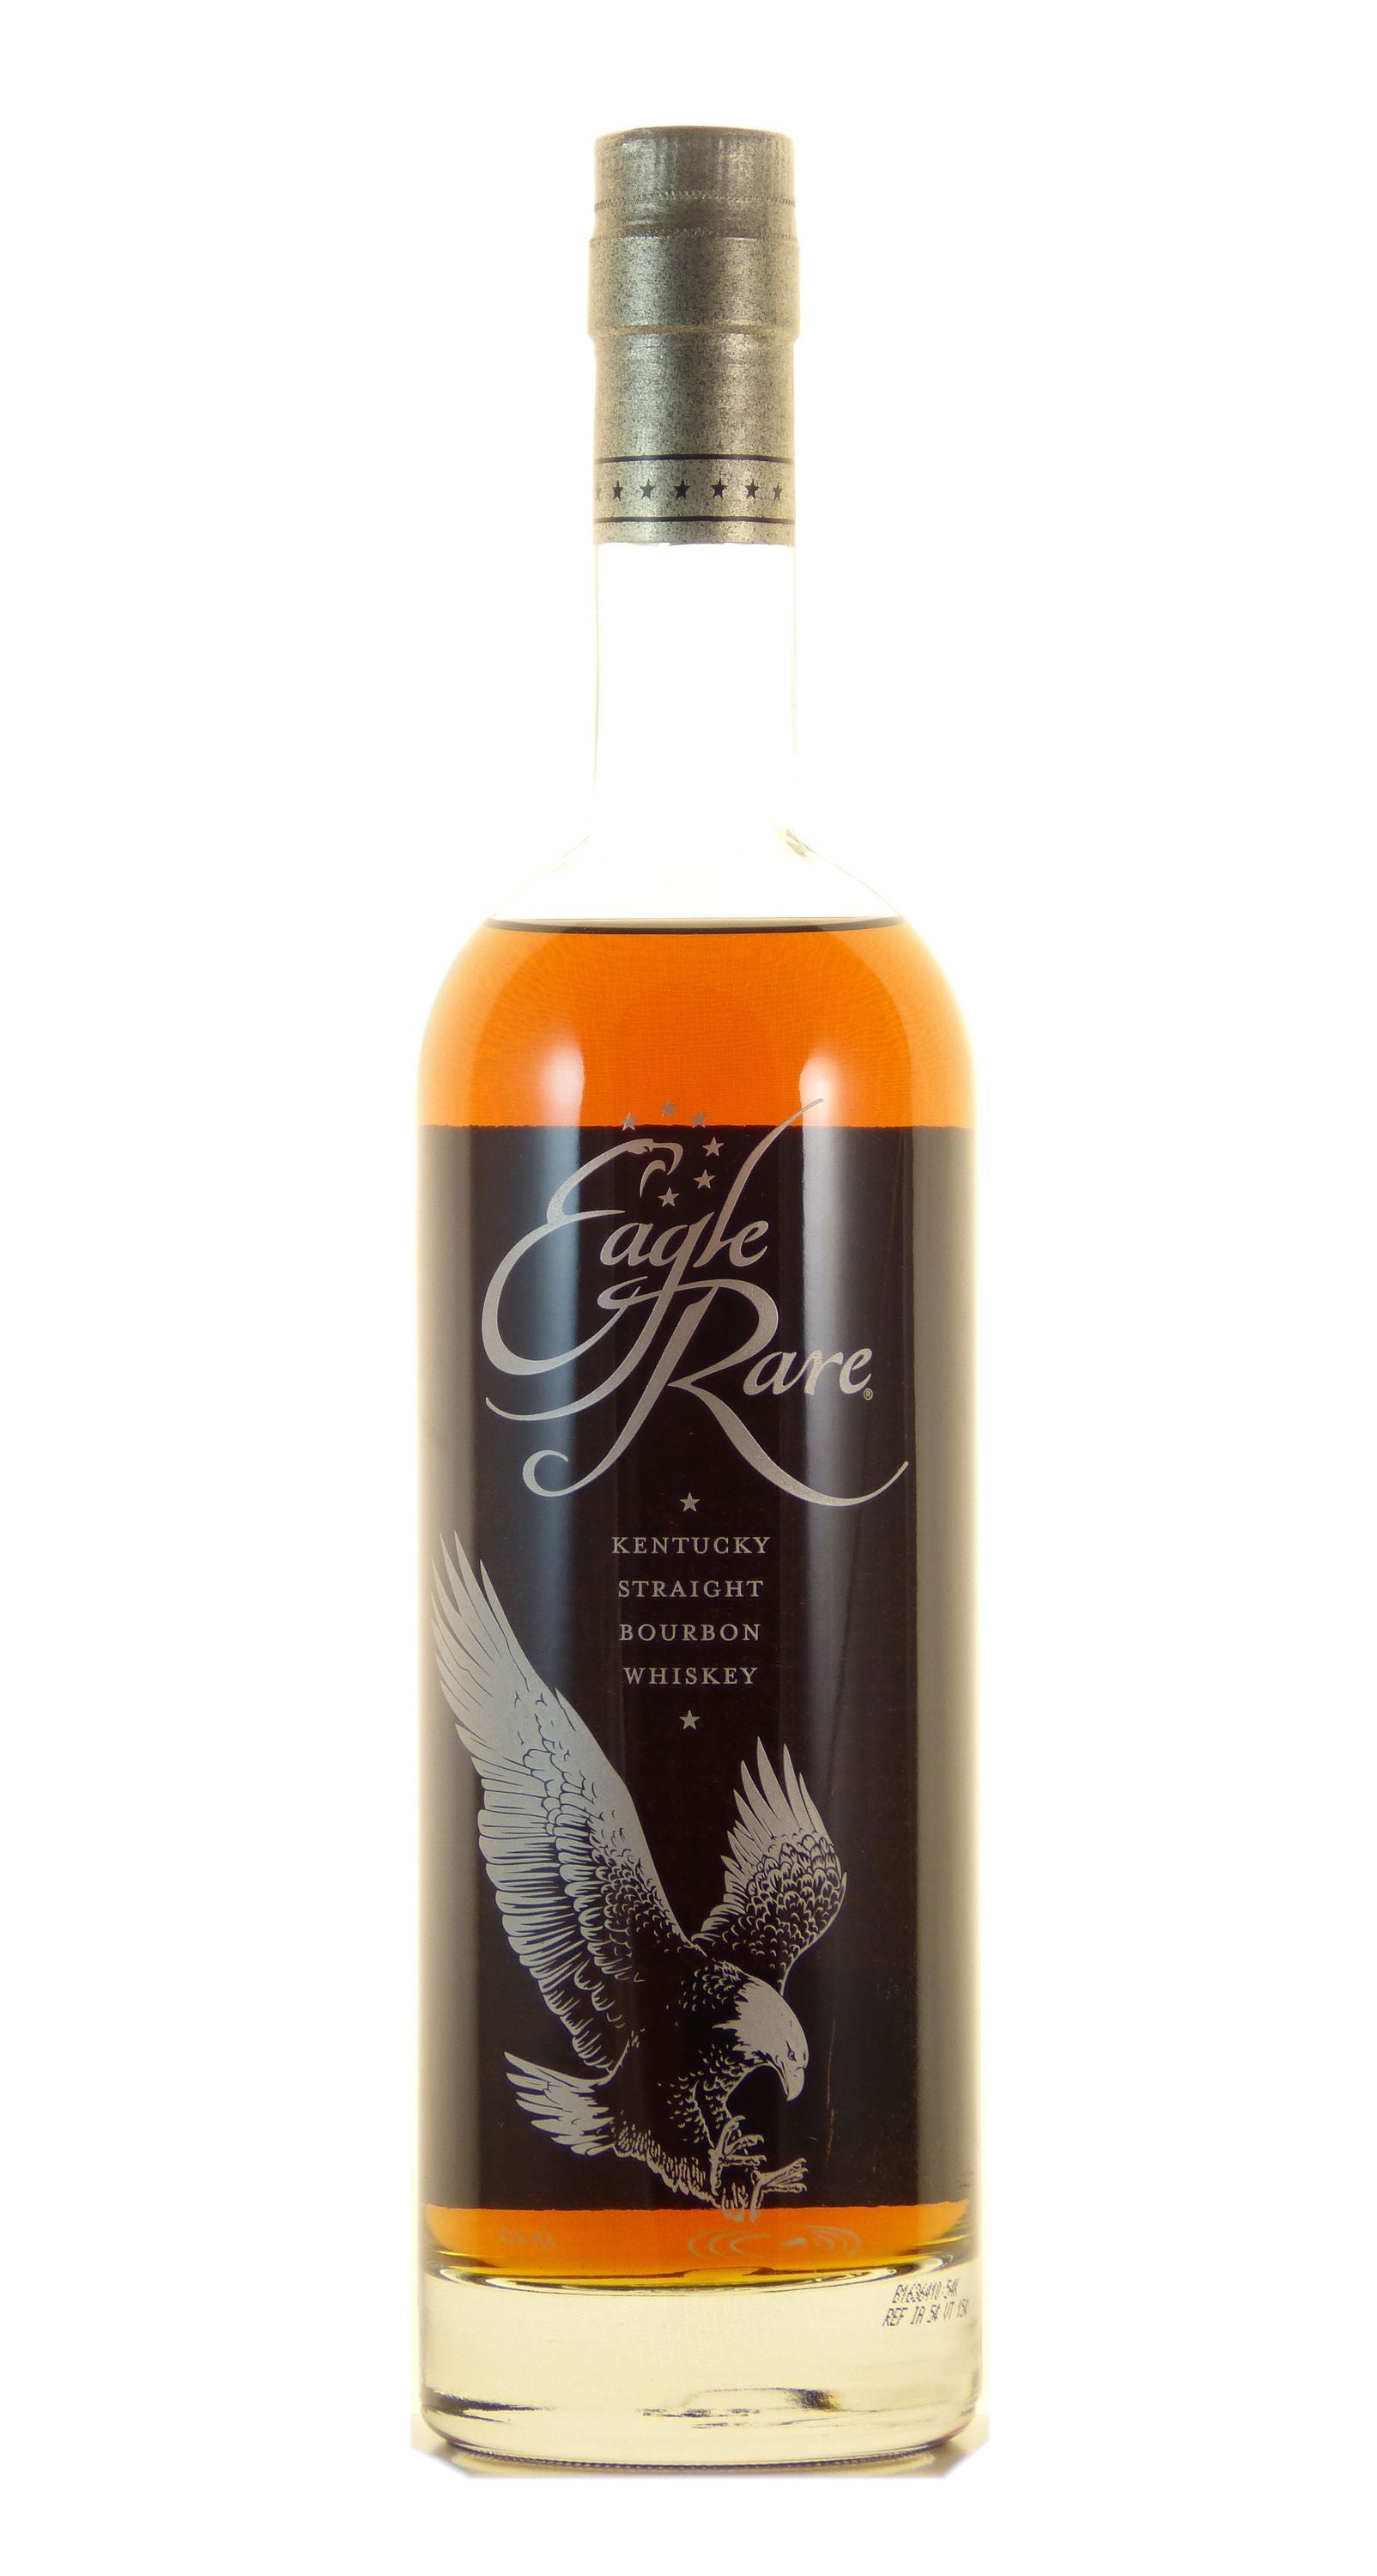 Eagle Rare 10 Years Kentucky Straight Bourbon Whiskey 0.7l, alc. 45% by volume